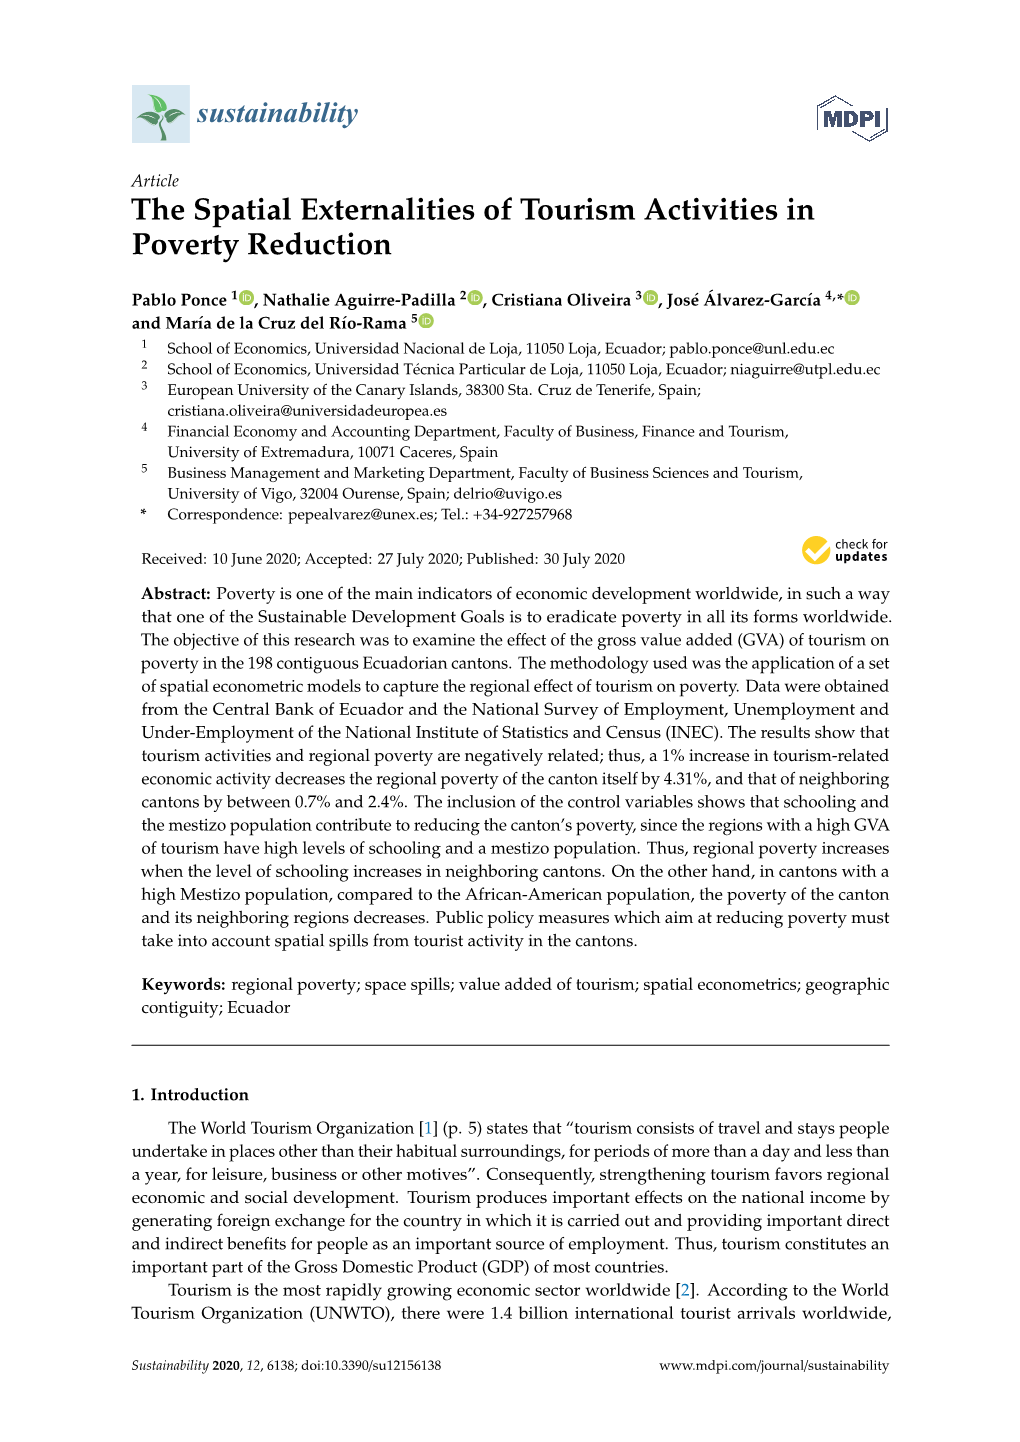 The Spatial Externalities of Tourism Activities in Poverty Reduction